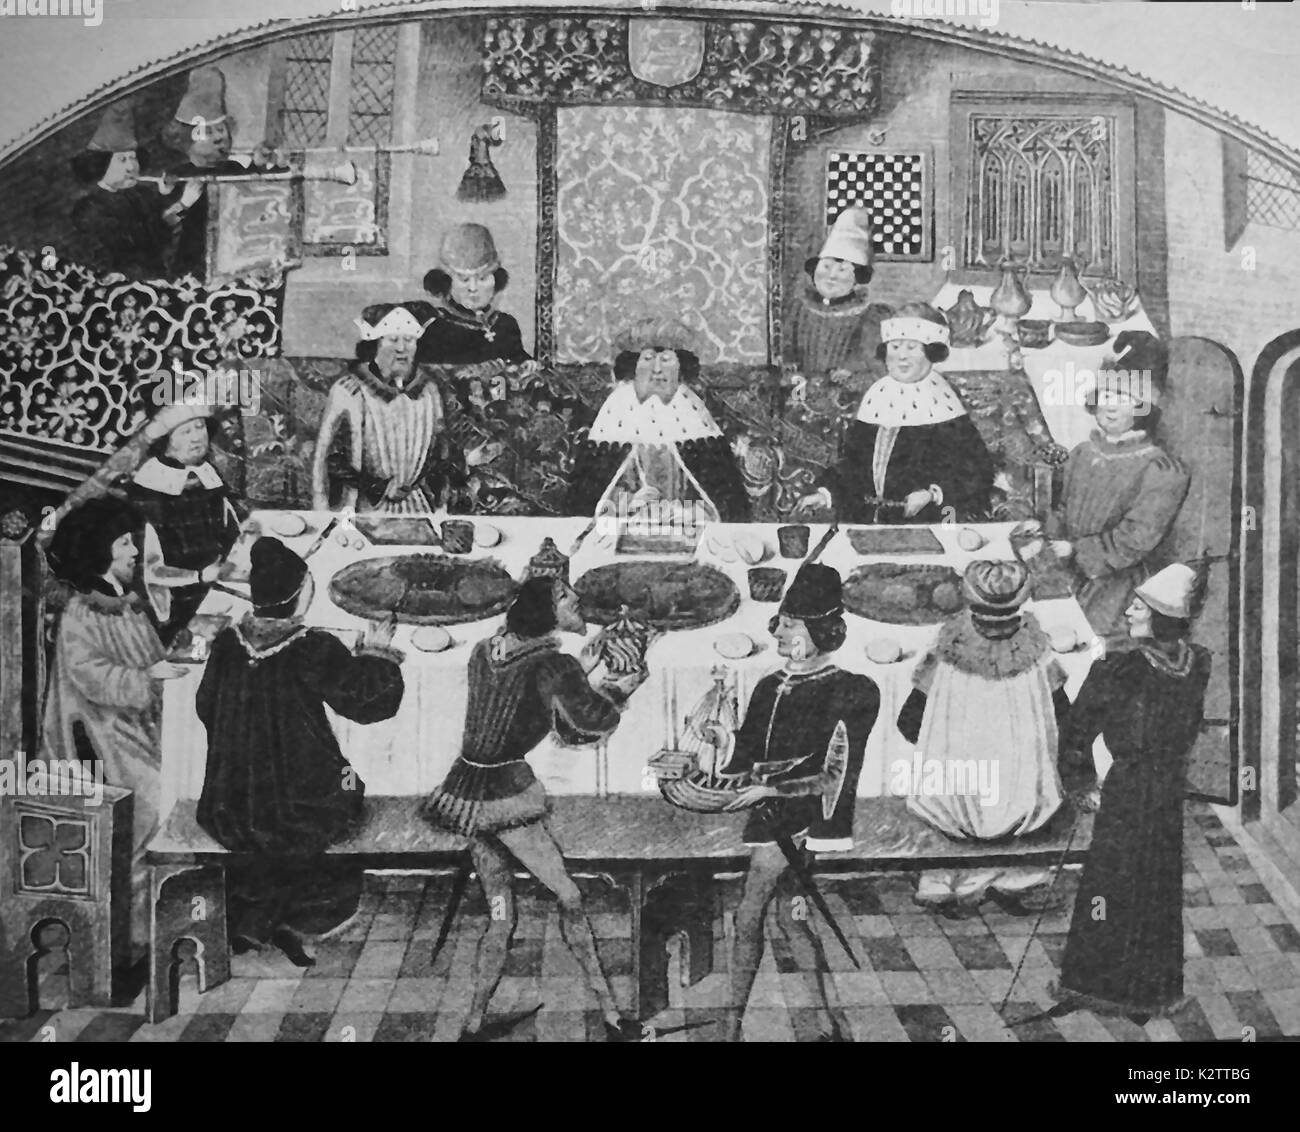 A typical high class banquet in a medieval castle dining hall showing the seating arrangement with the Lord of the manor (or a king) sitting in a plush chair at the side and with servants bringing food.(Note: knives but no forks) Stock Photo